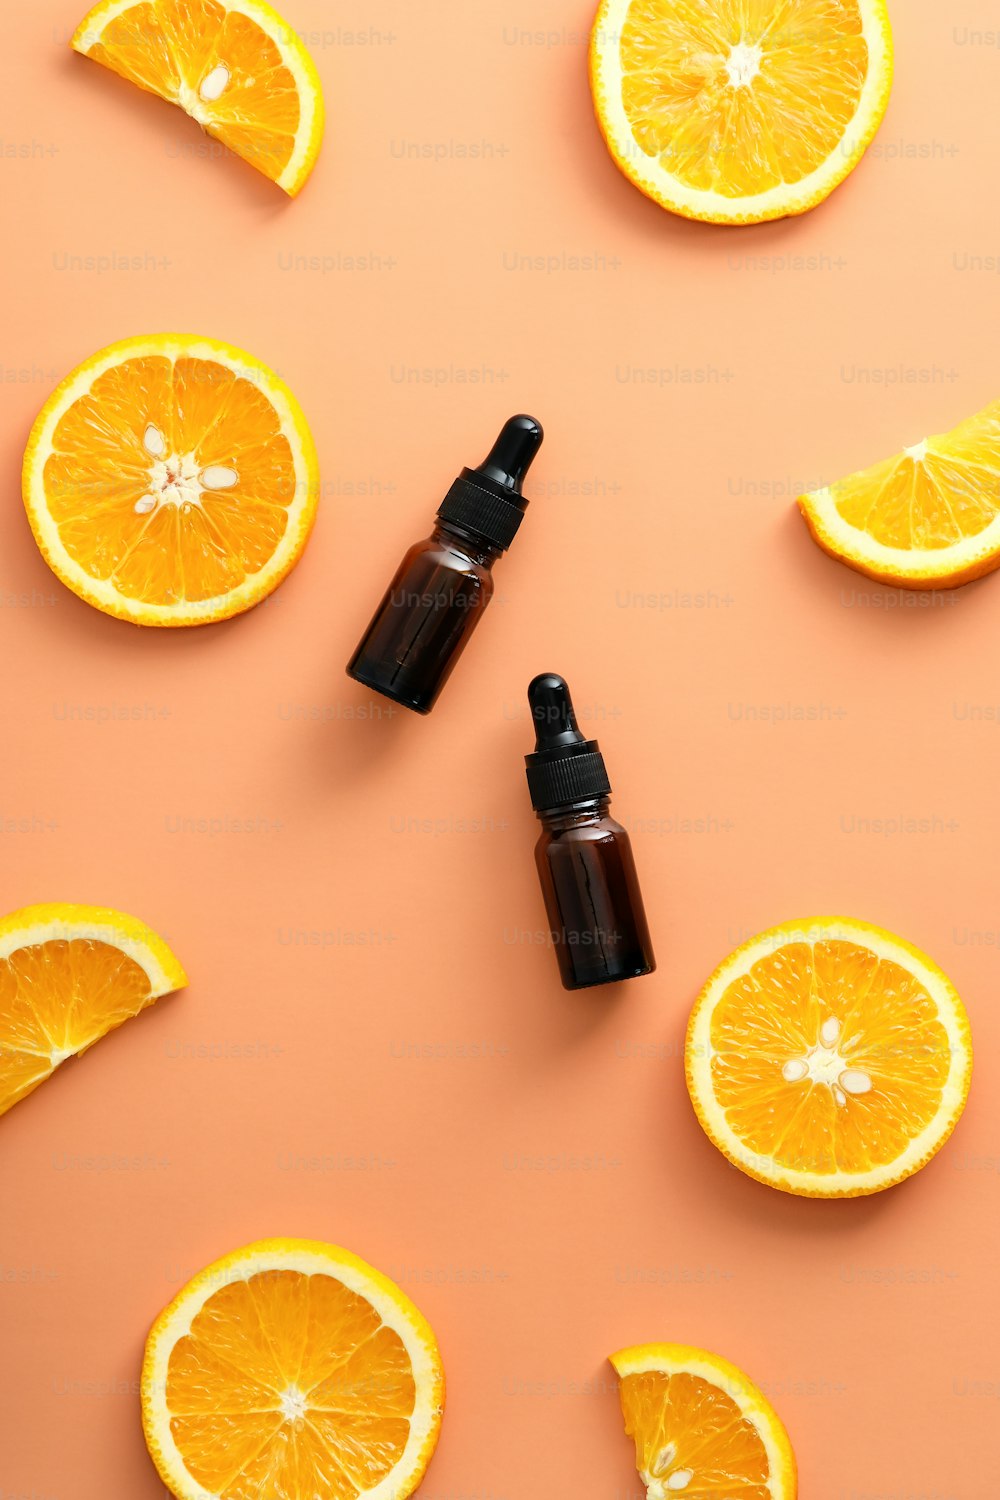 Vitamin C serum dropper bottles with sliced orange top view. Natural beauty products design.